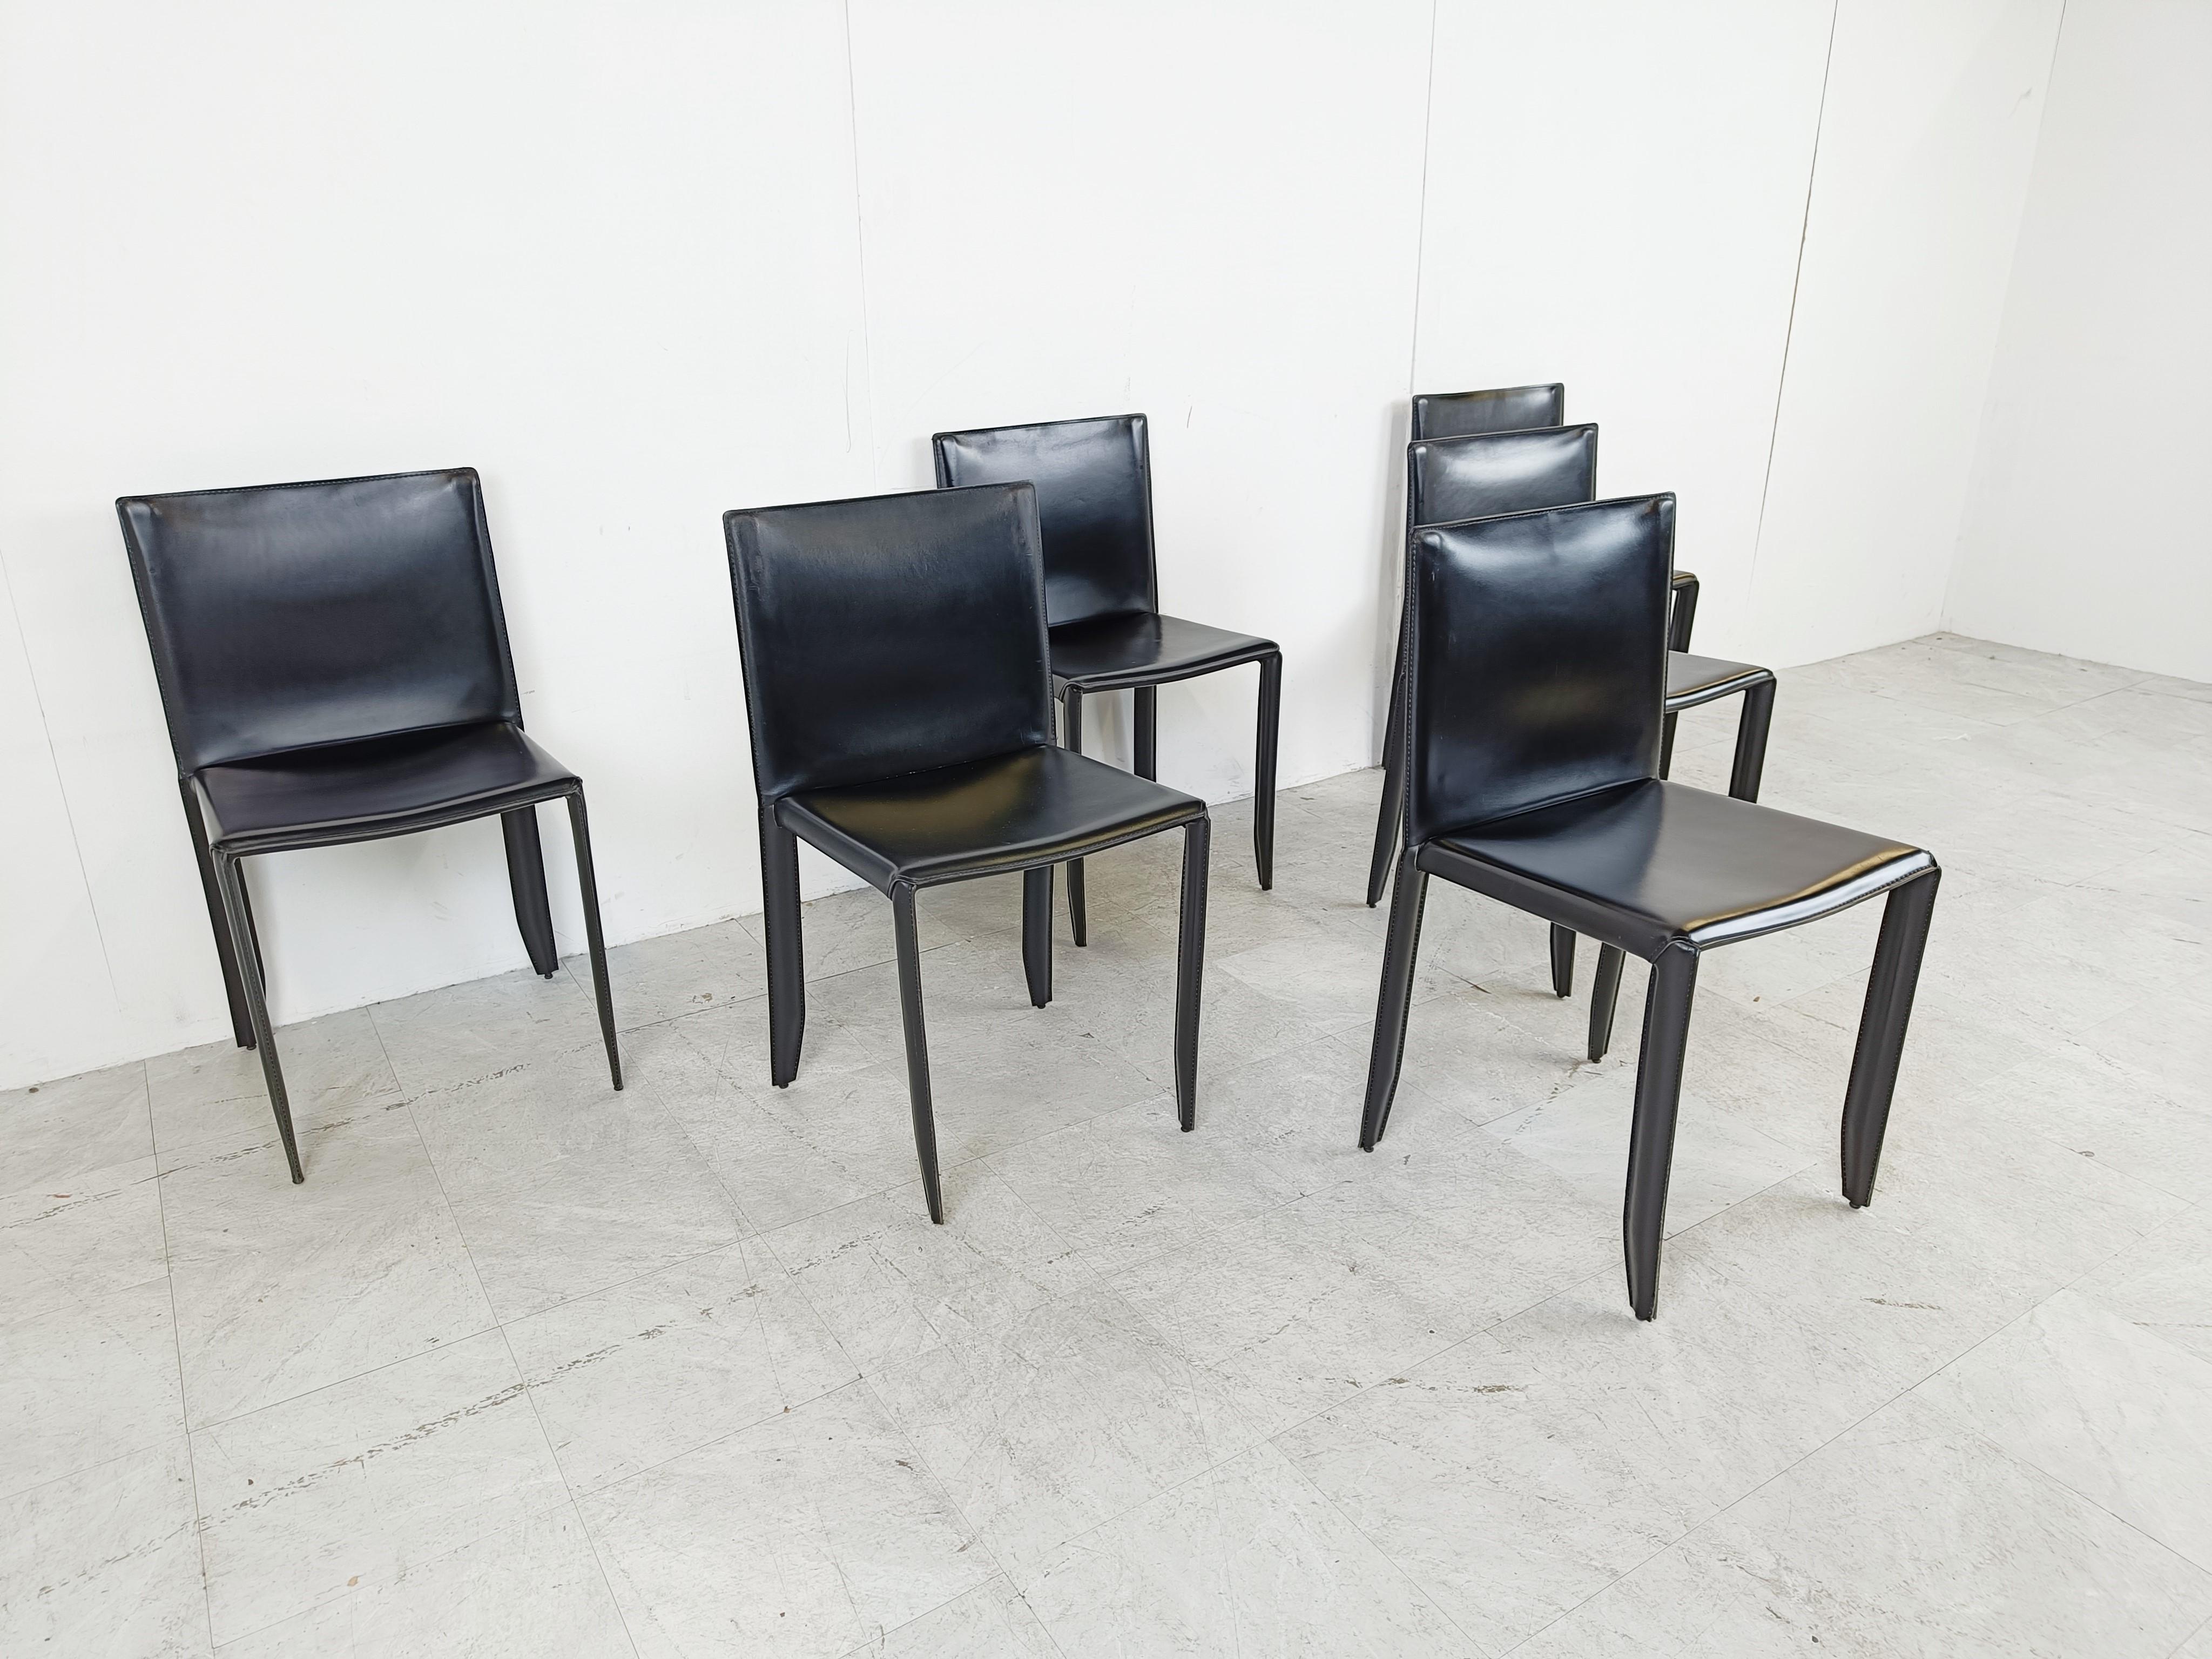 Late 20th Century Black Leather Dining Chairs by Cattelan Italy, Set of 6 - 1980s For Sale